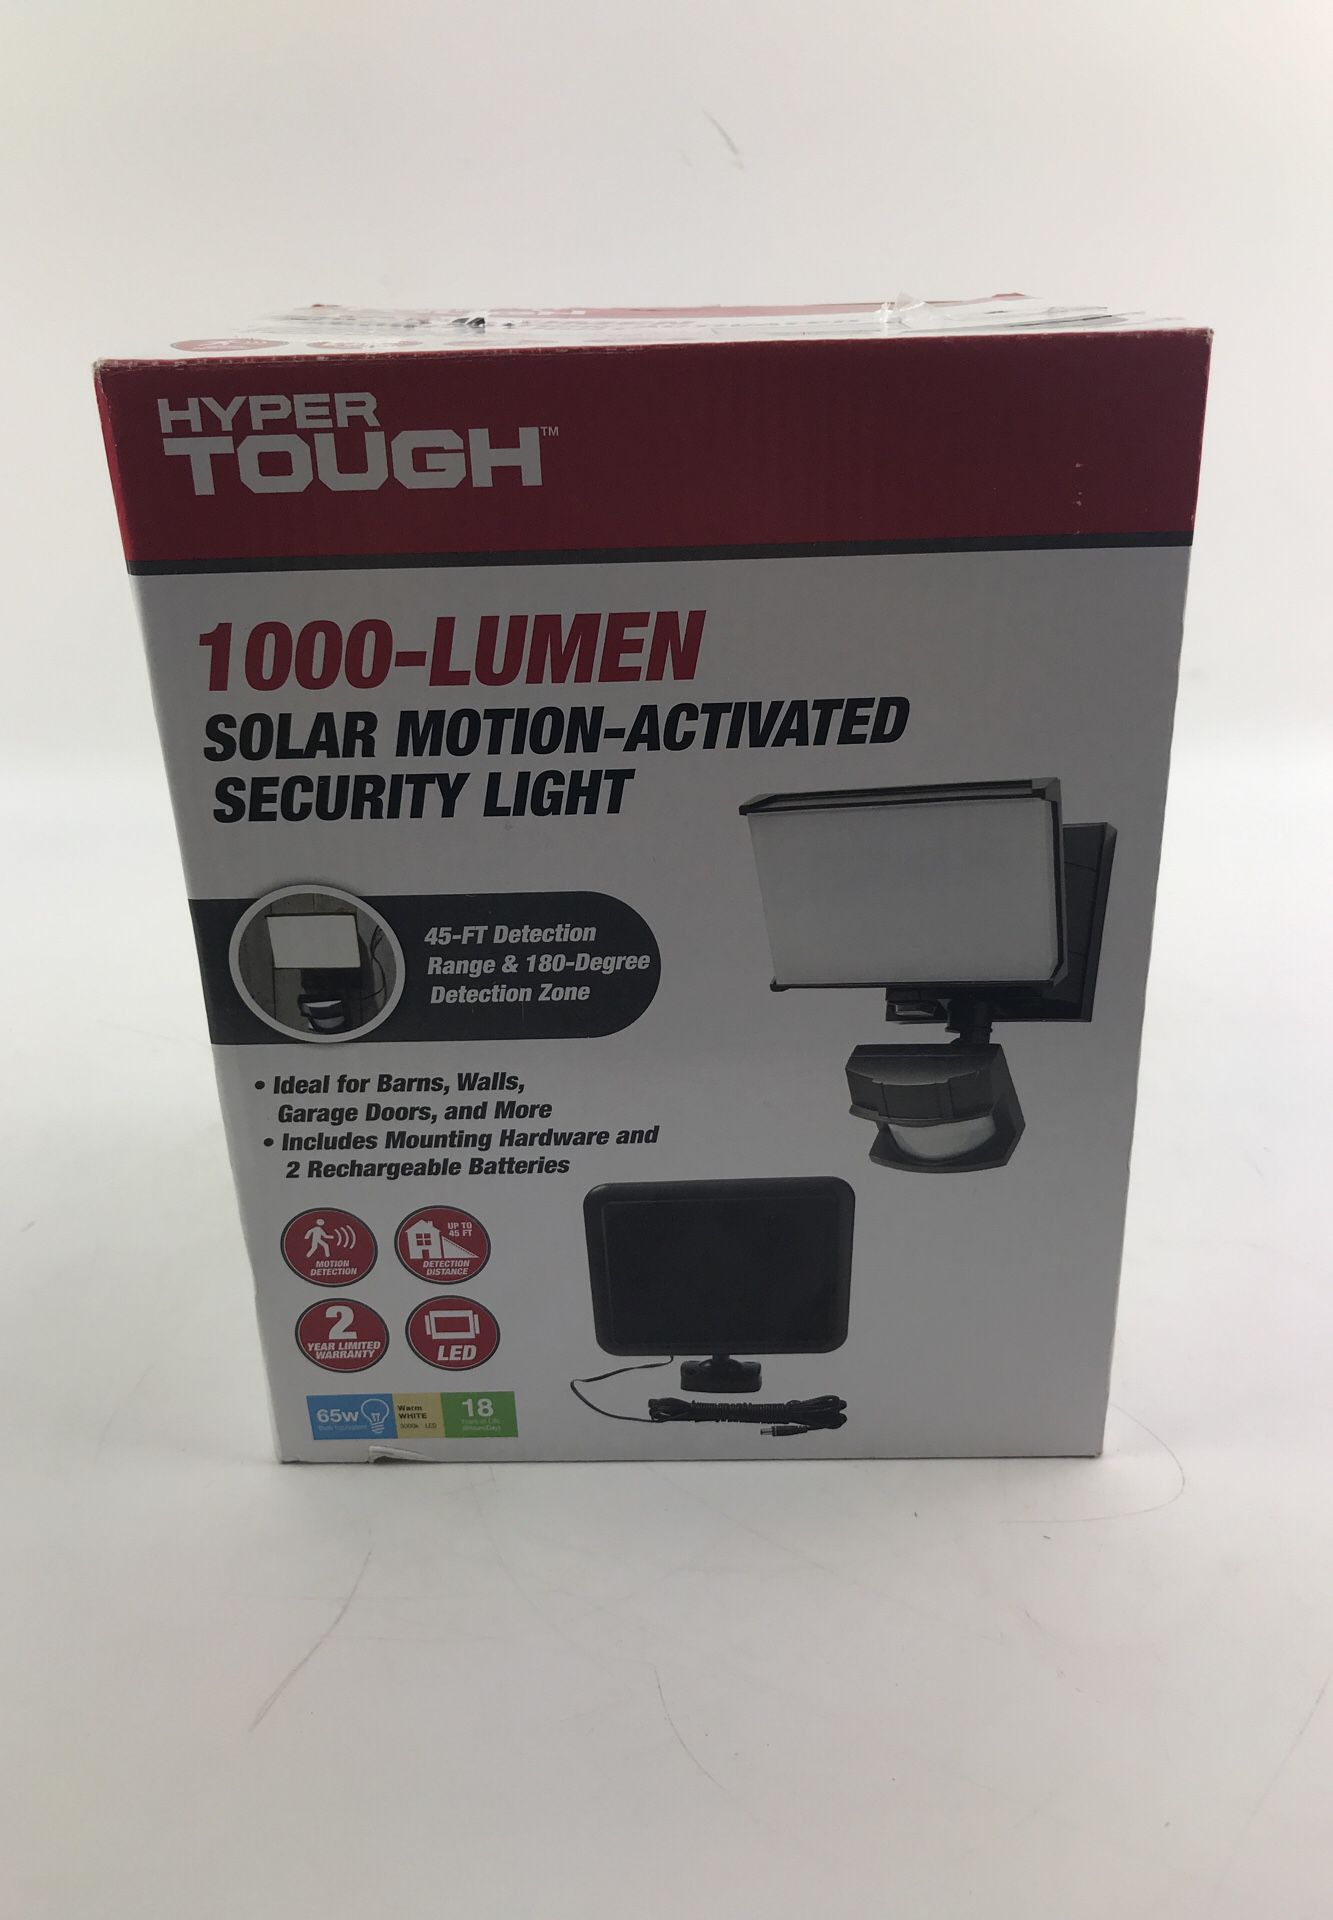 Brand New hyper tough 1000-Lumen solar motion- activated security light for  Sale in Beaver Falls, PA OfferUp